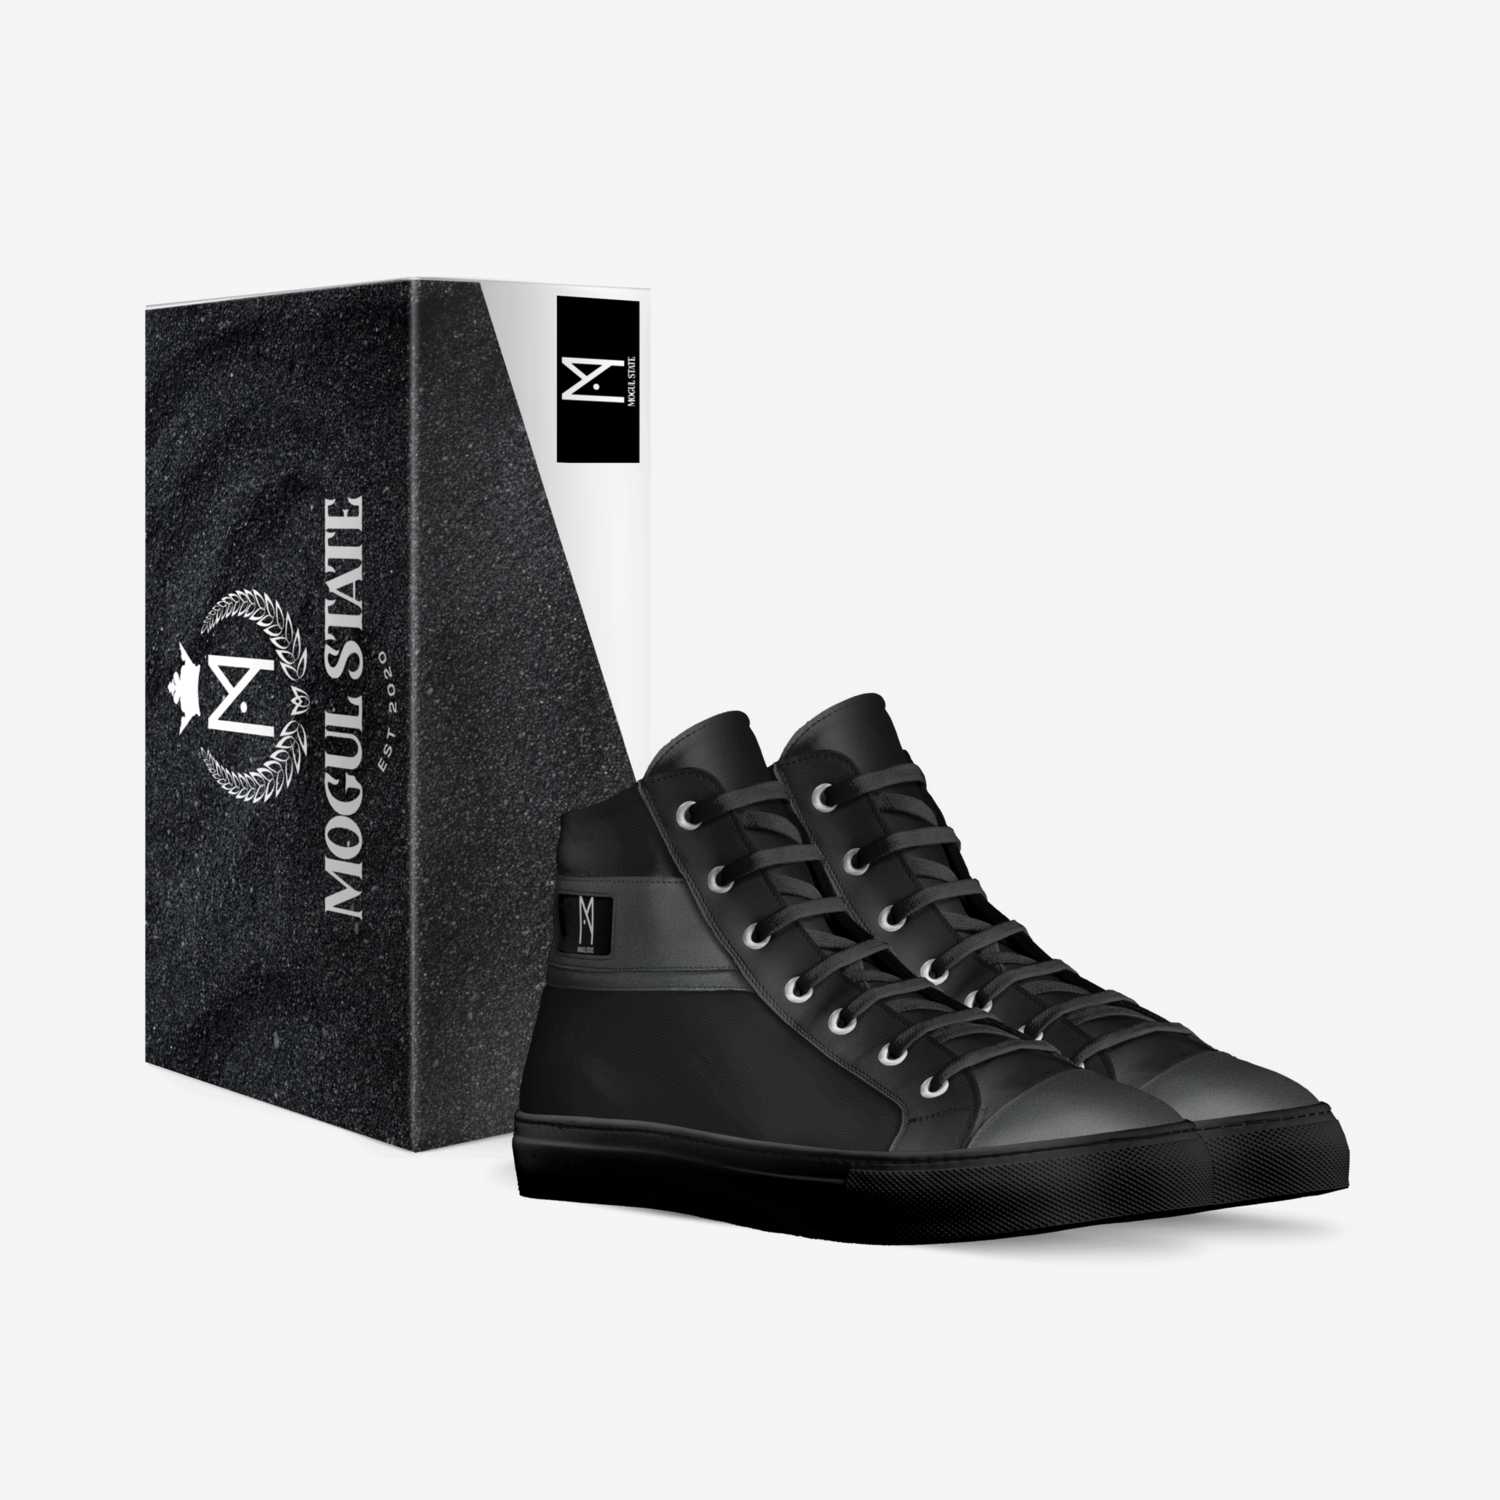 MOGUL LIFESTYLE X custom made in Italy shoes by Mogul State | Box view